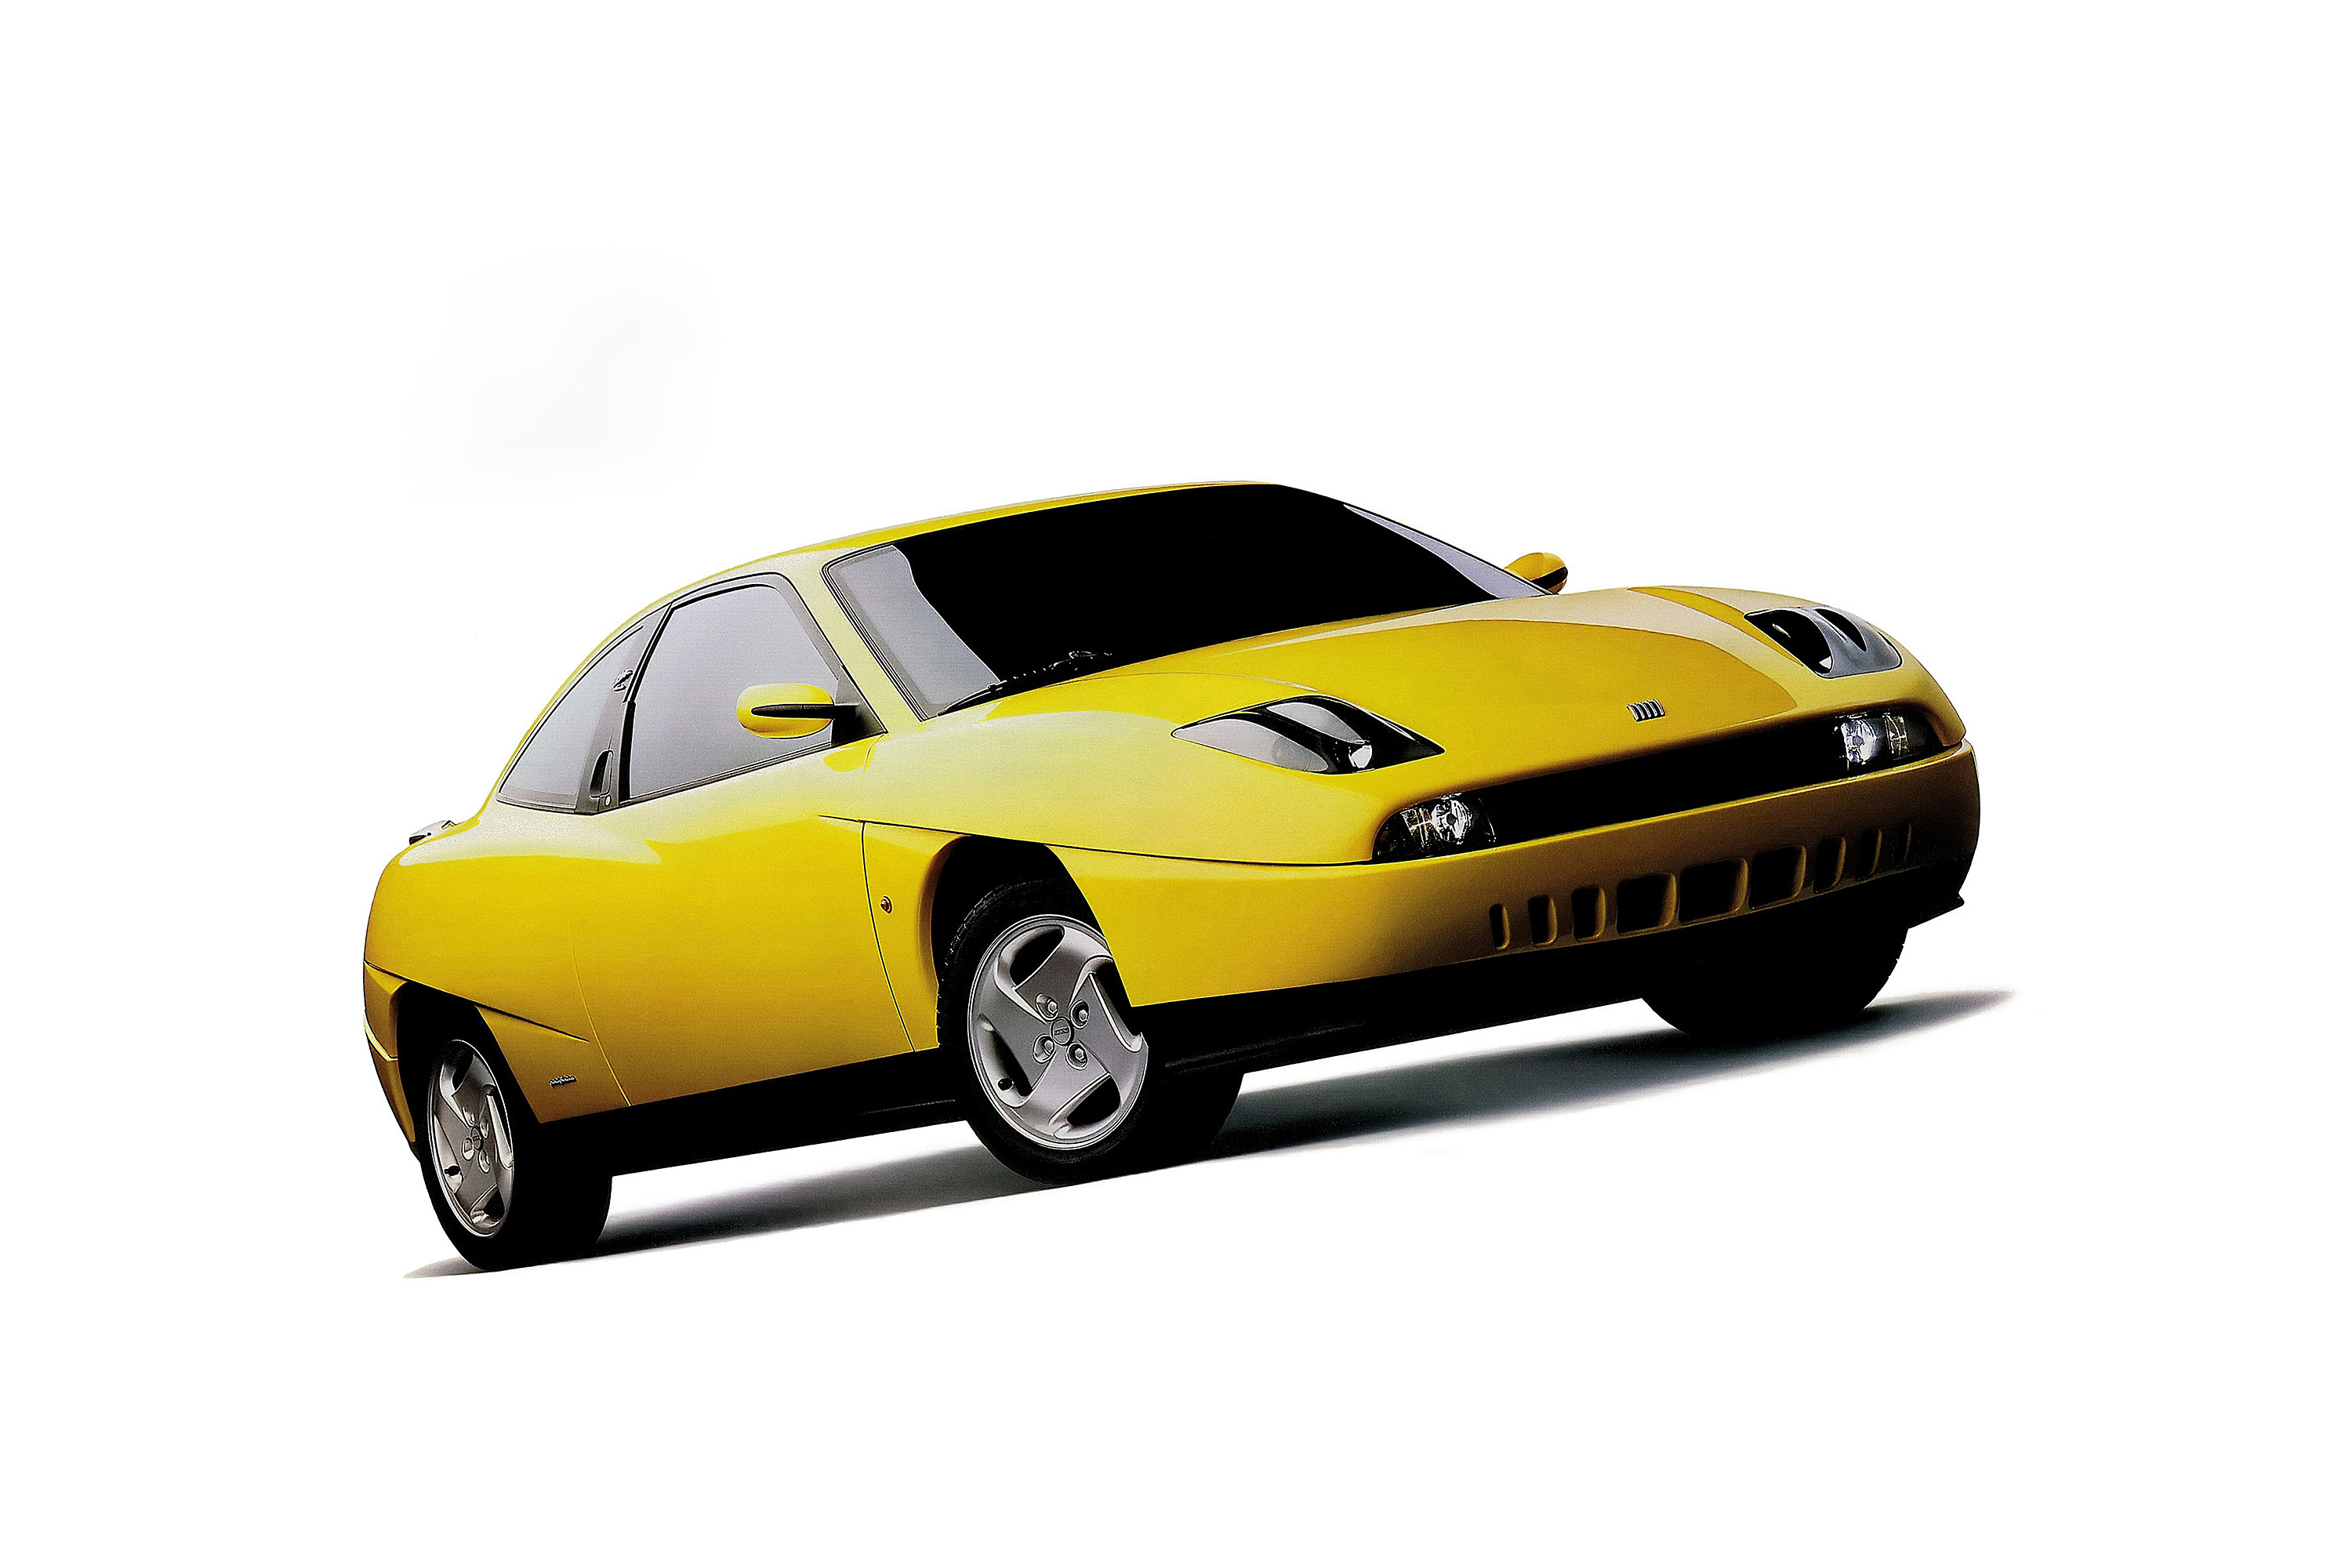  1995 Fiat Coupe Wallpaper.